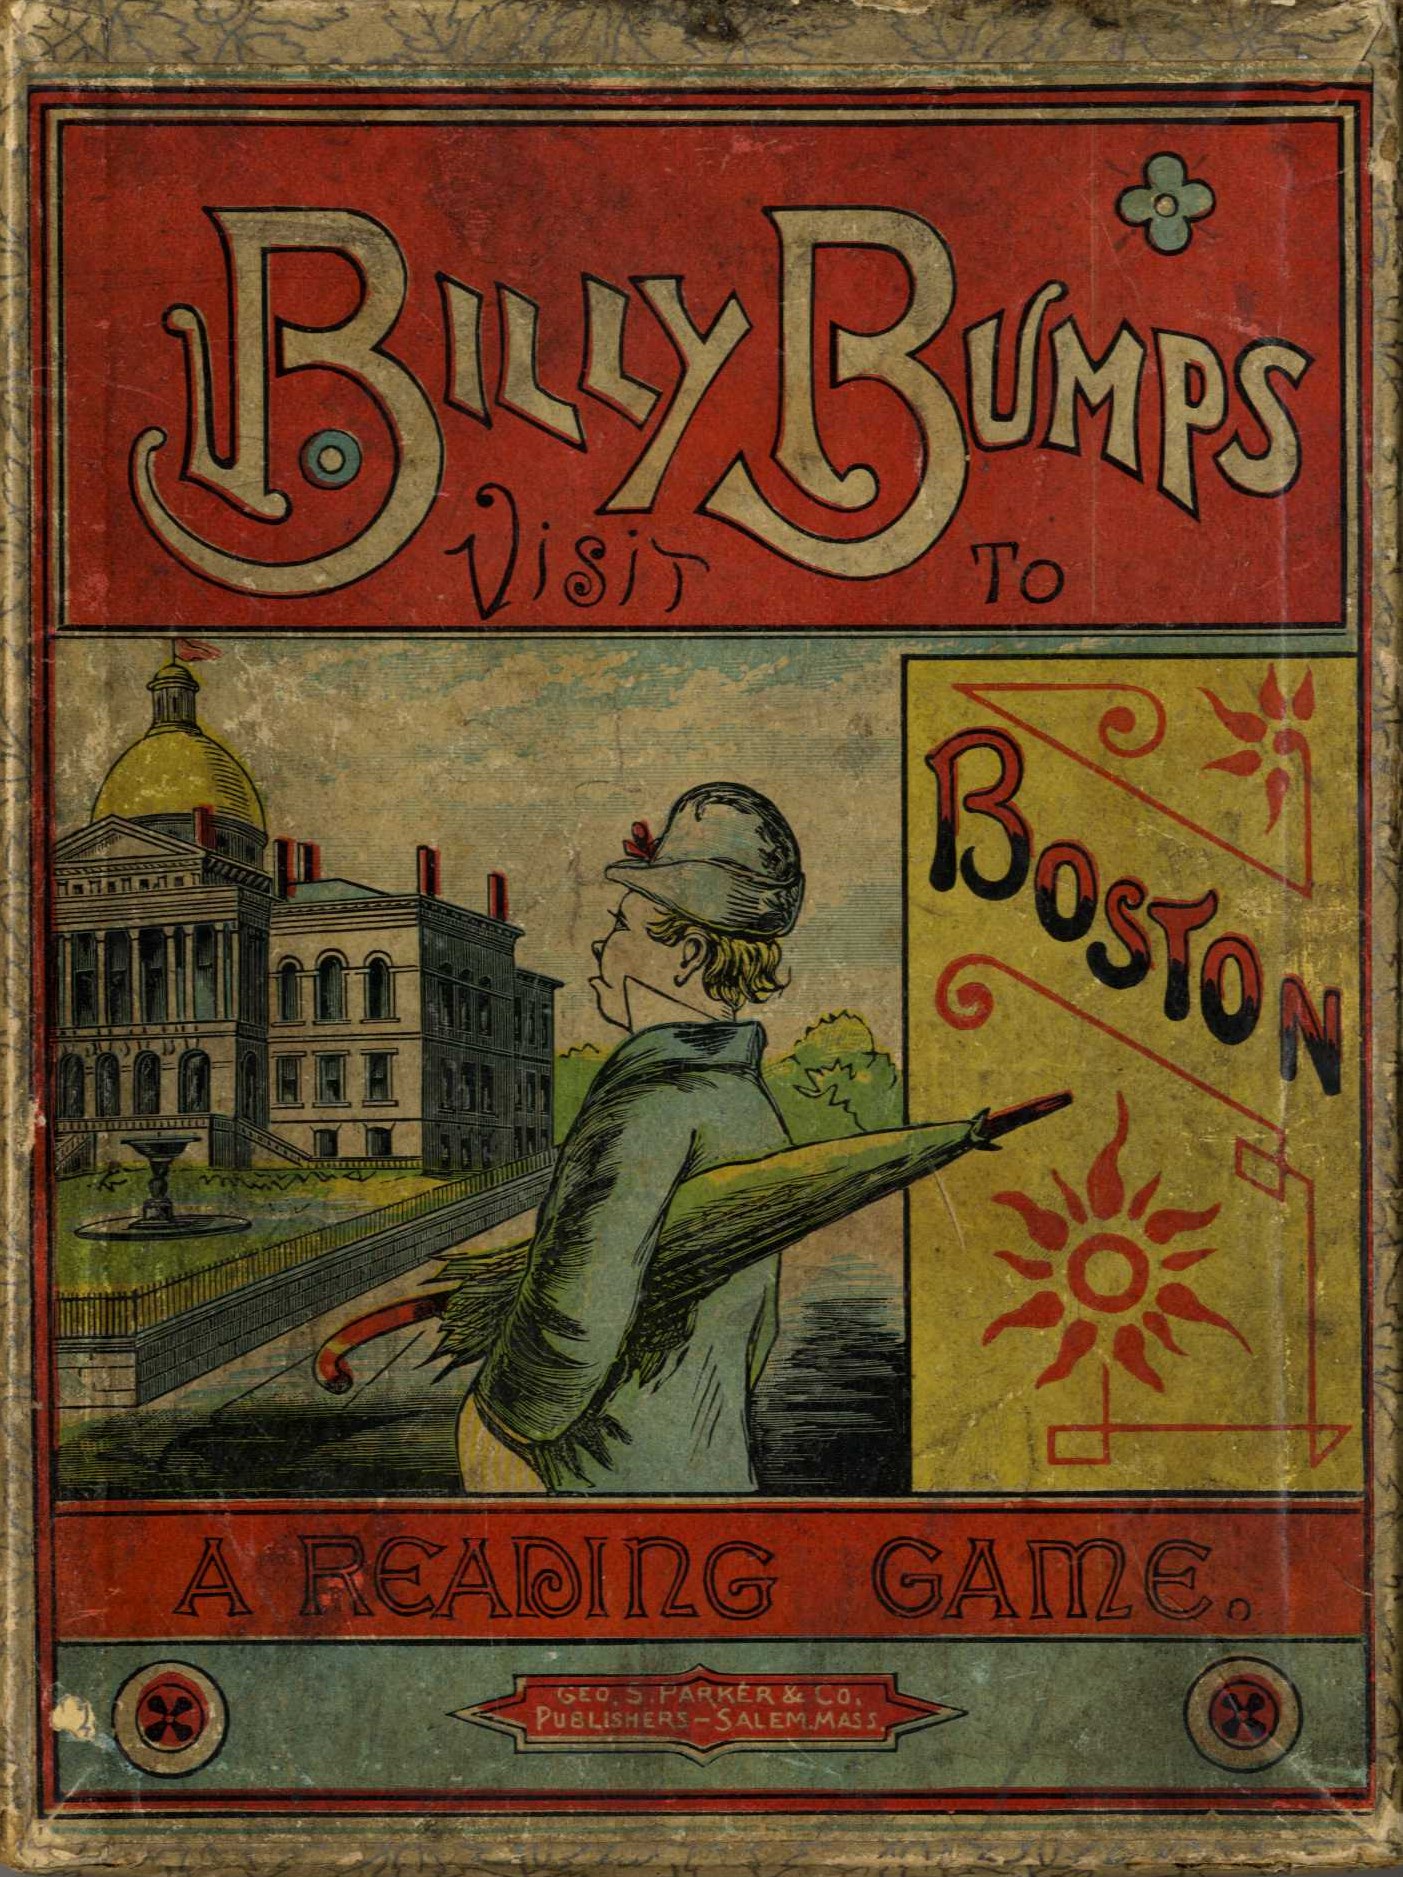 Billy Bump's Visit to Boston - a reading game, published in 1888.